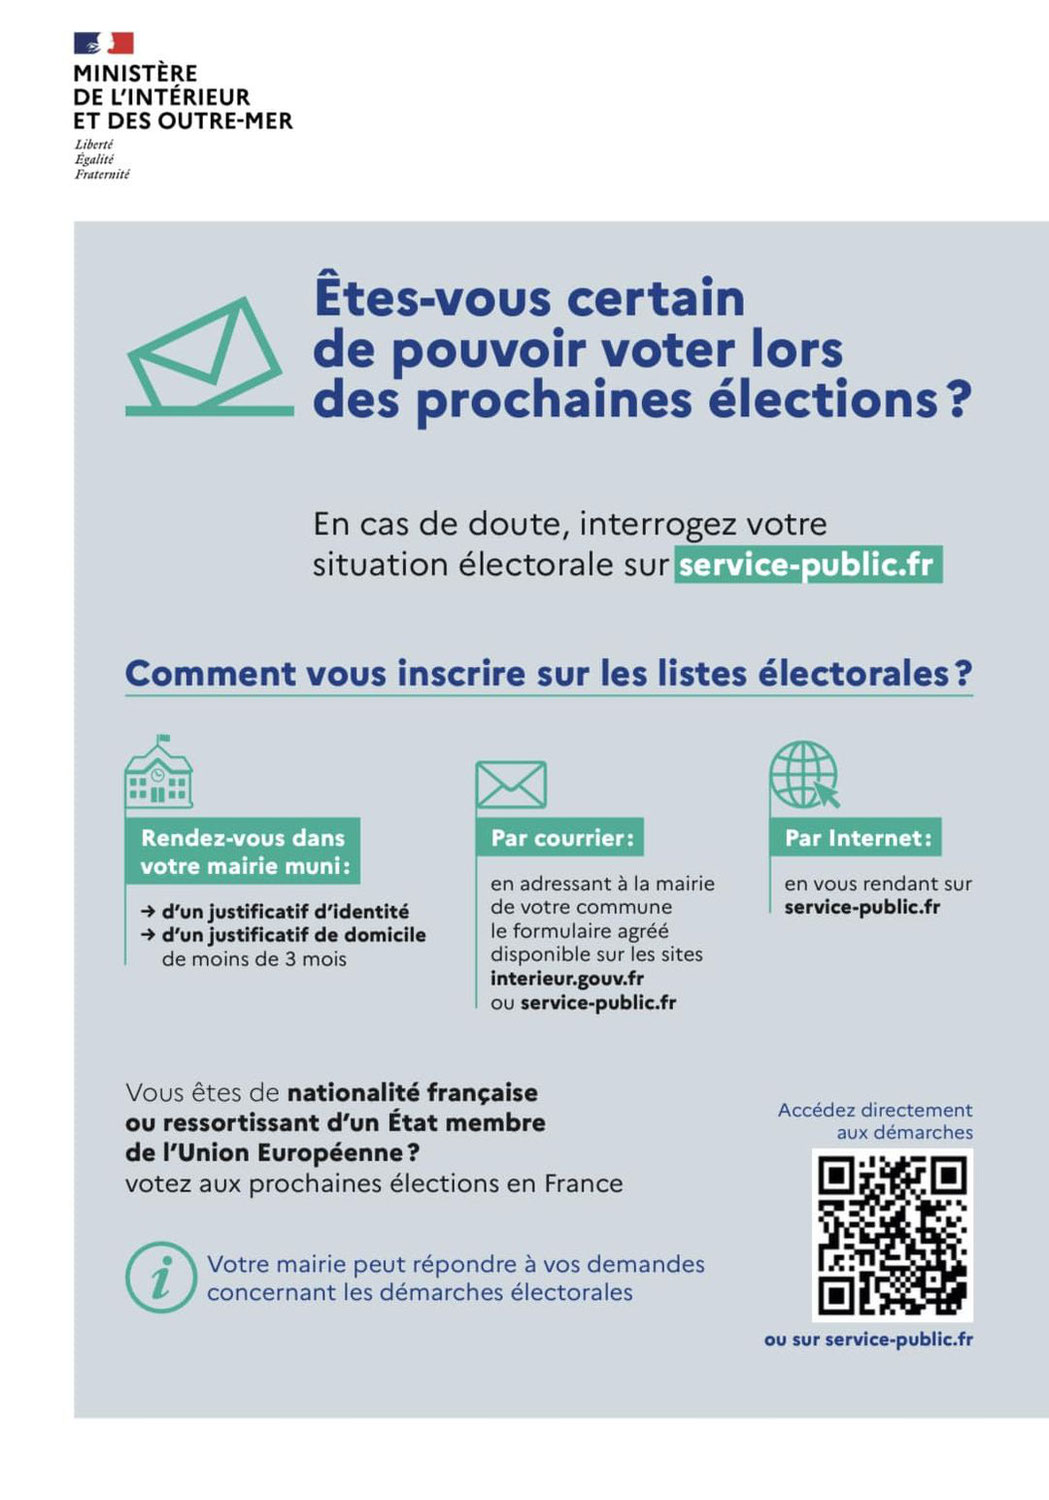 Elections europeennes